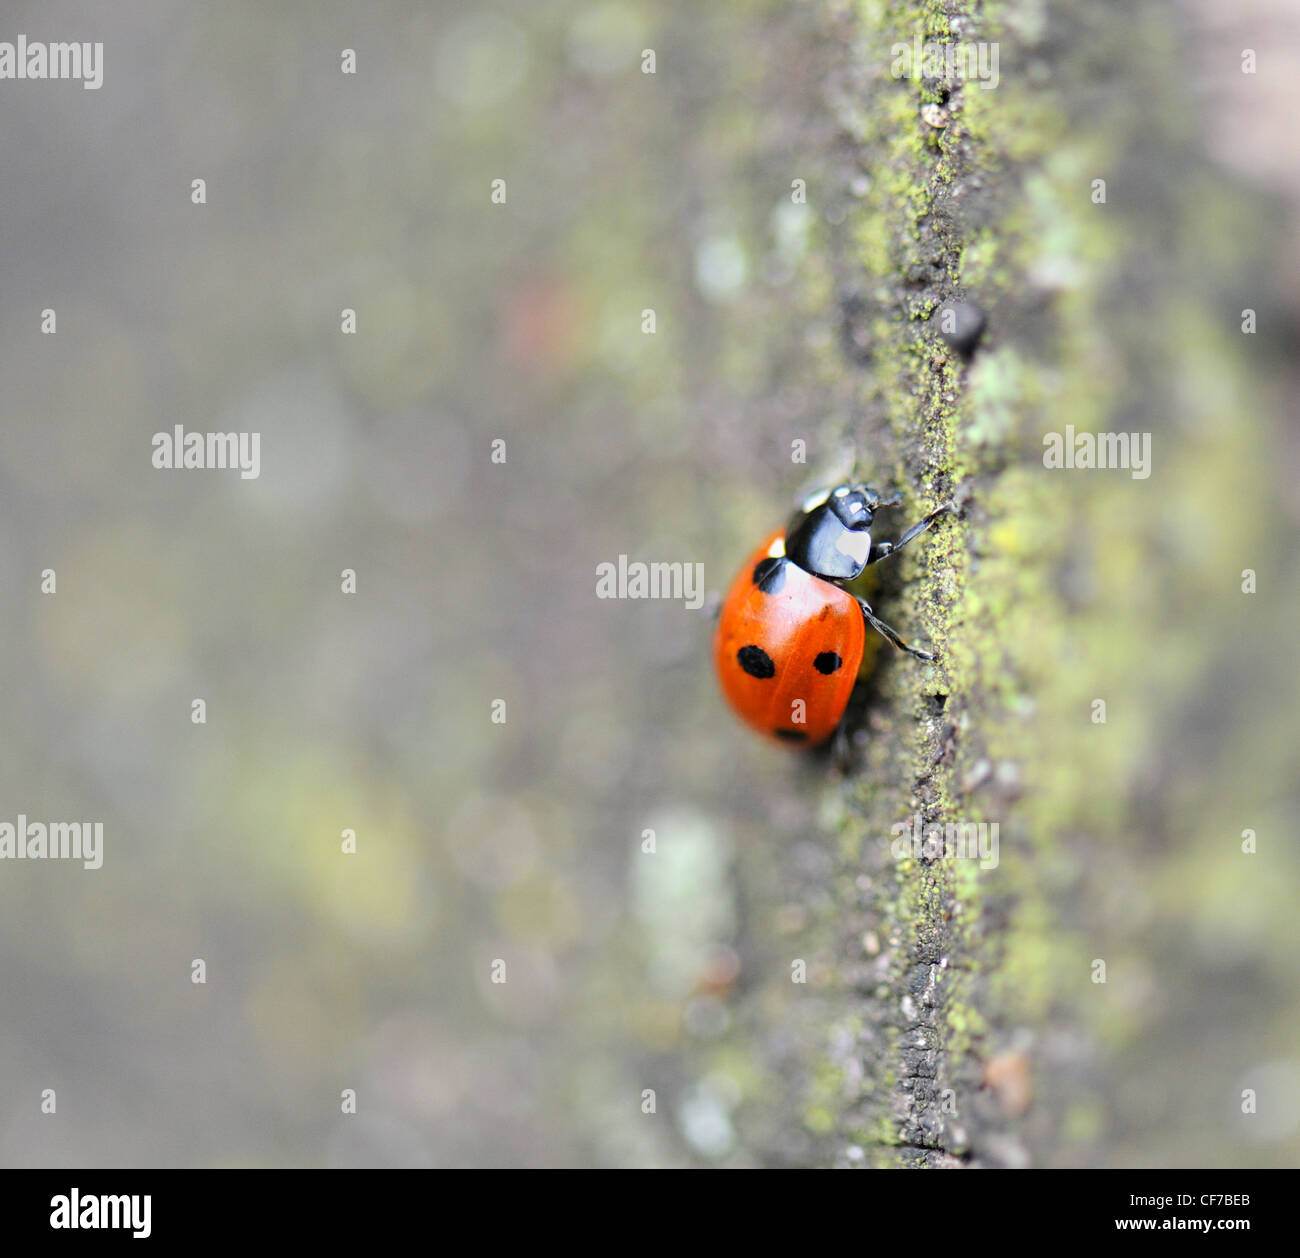 Ladybird Insect Stock Photo